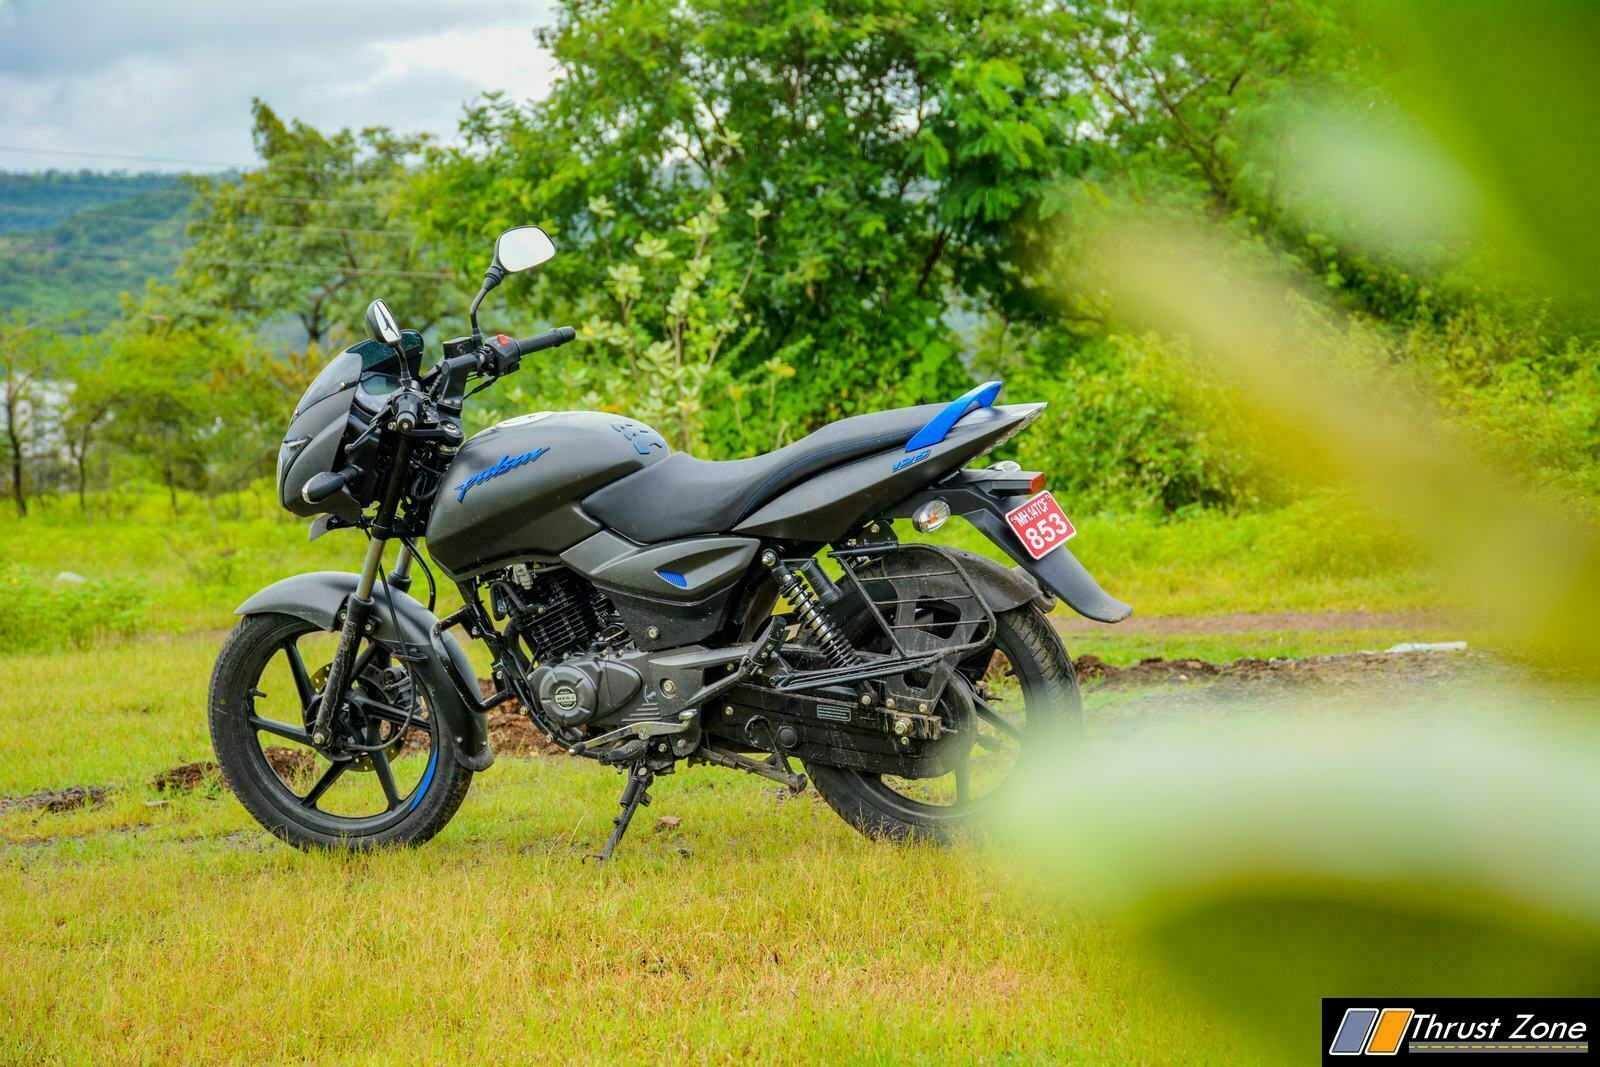 2020 Pulsar 125 Review 7 Thrust Zone